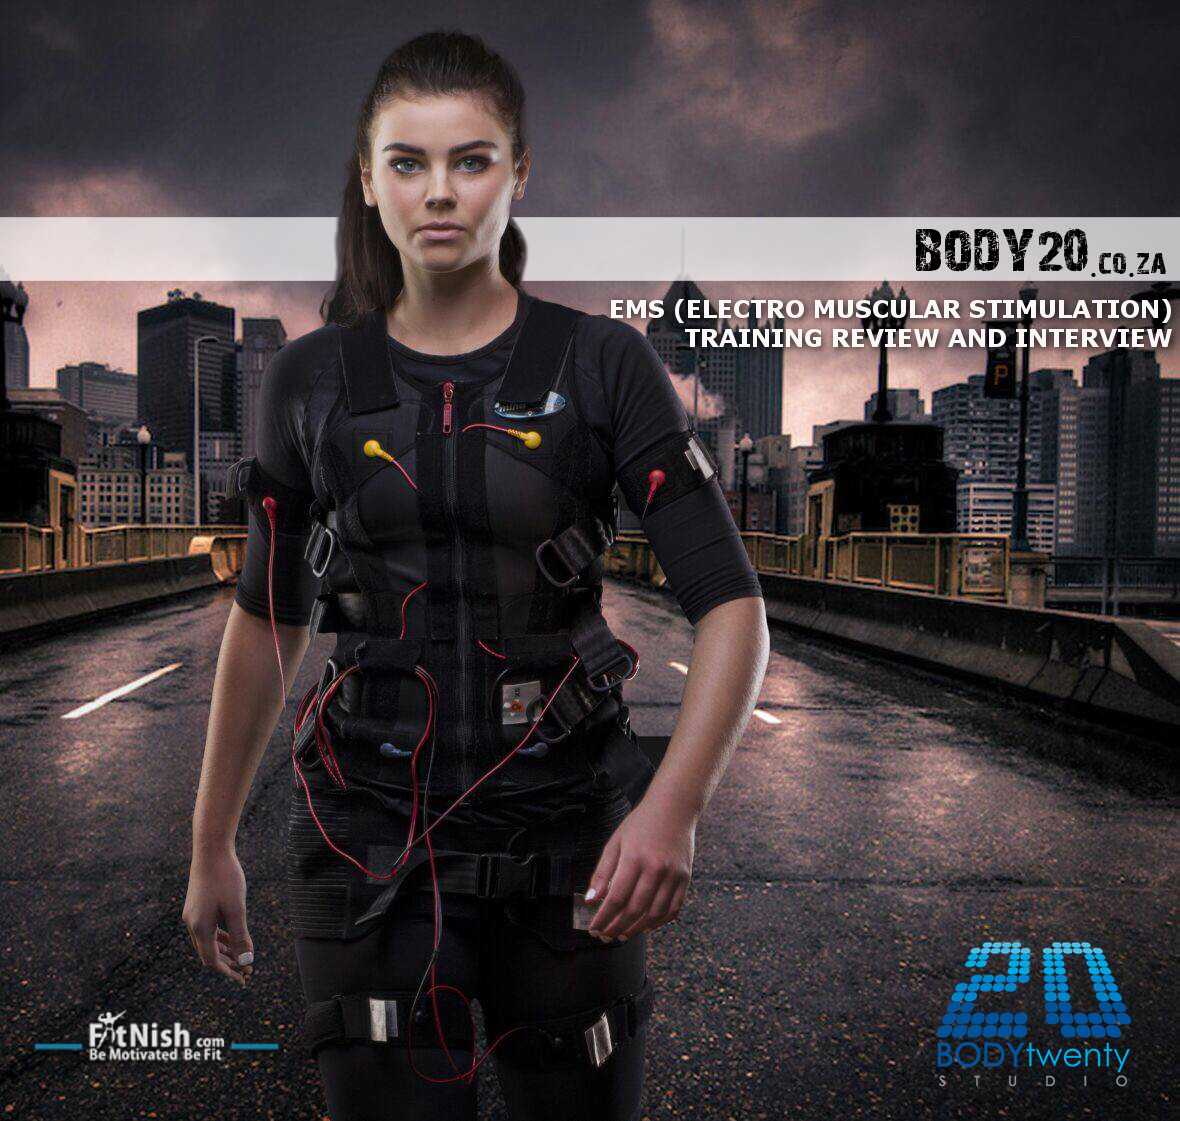 Body 20 EMS (Electro Muscular Stimulation) Training Review And Interview